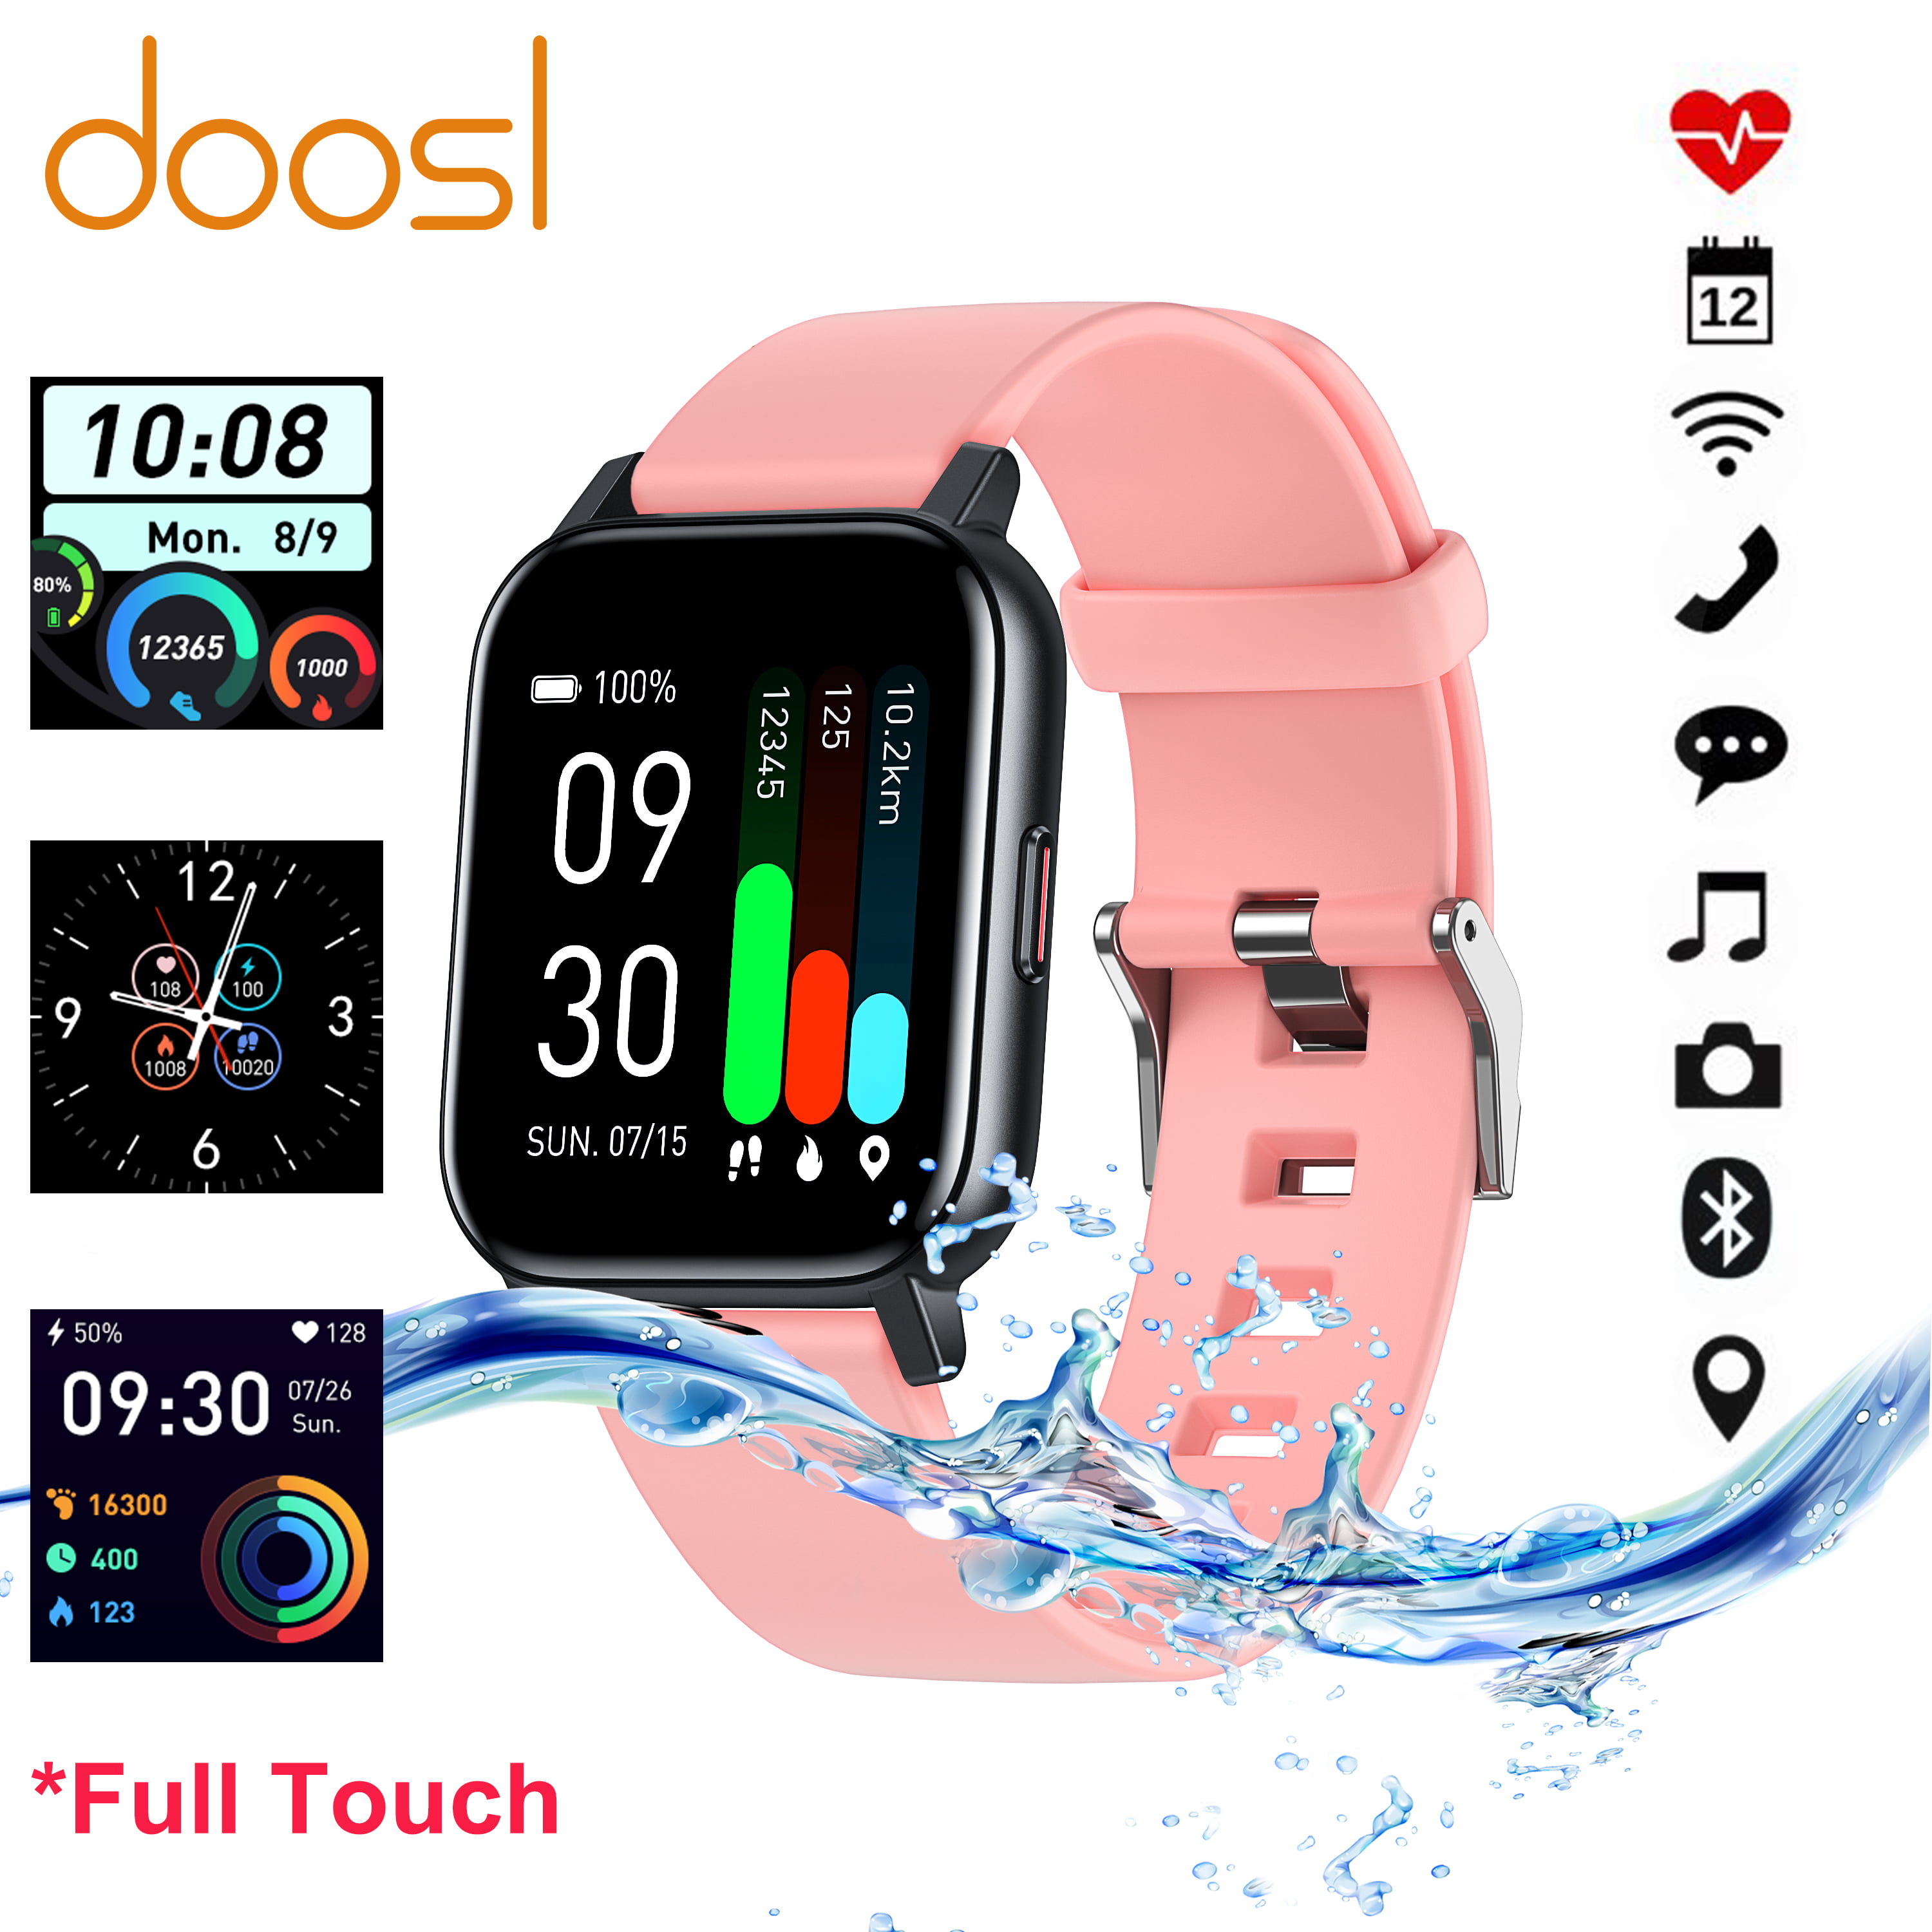 Doosl Smart Watch For Android And Ios Phones Compatible iPhone Samsung IP68 Swimming Waterproof Fitness Tracker Fitness Watch Heart Rate Monitor Smart Watches For Men Women Pink J351 - Walmart.com